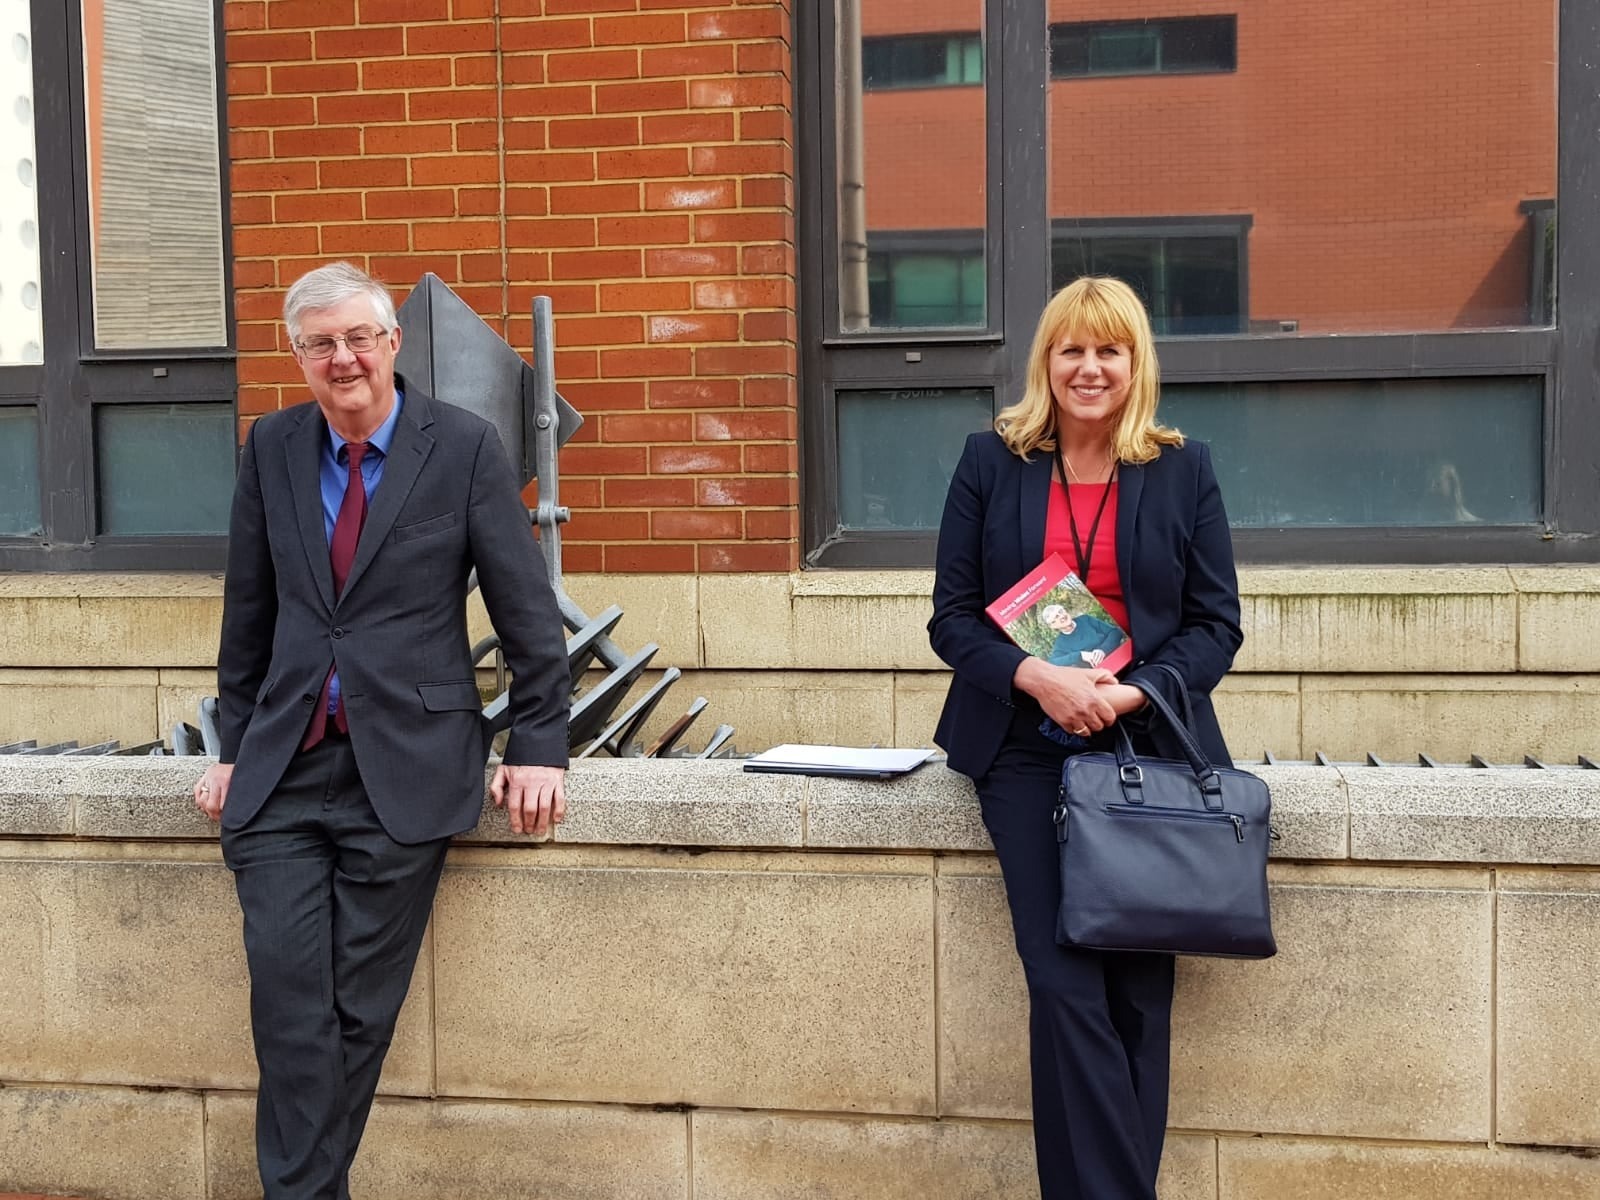 Cllr Carolyn Thomas, who was elected as an MS earlier this month, pictured alongside First Minister Mark Drakeford. Source: Carolyn Thomas